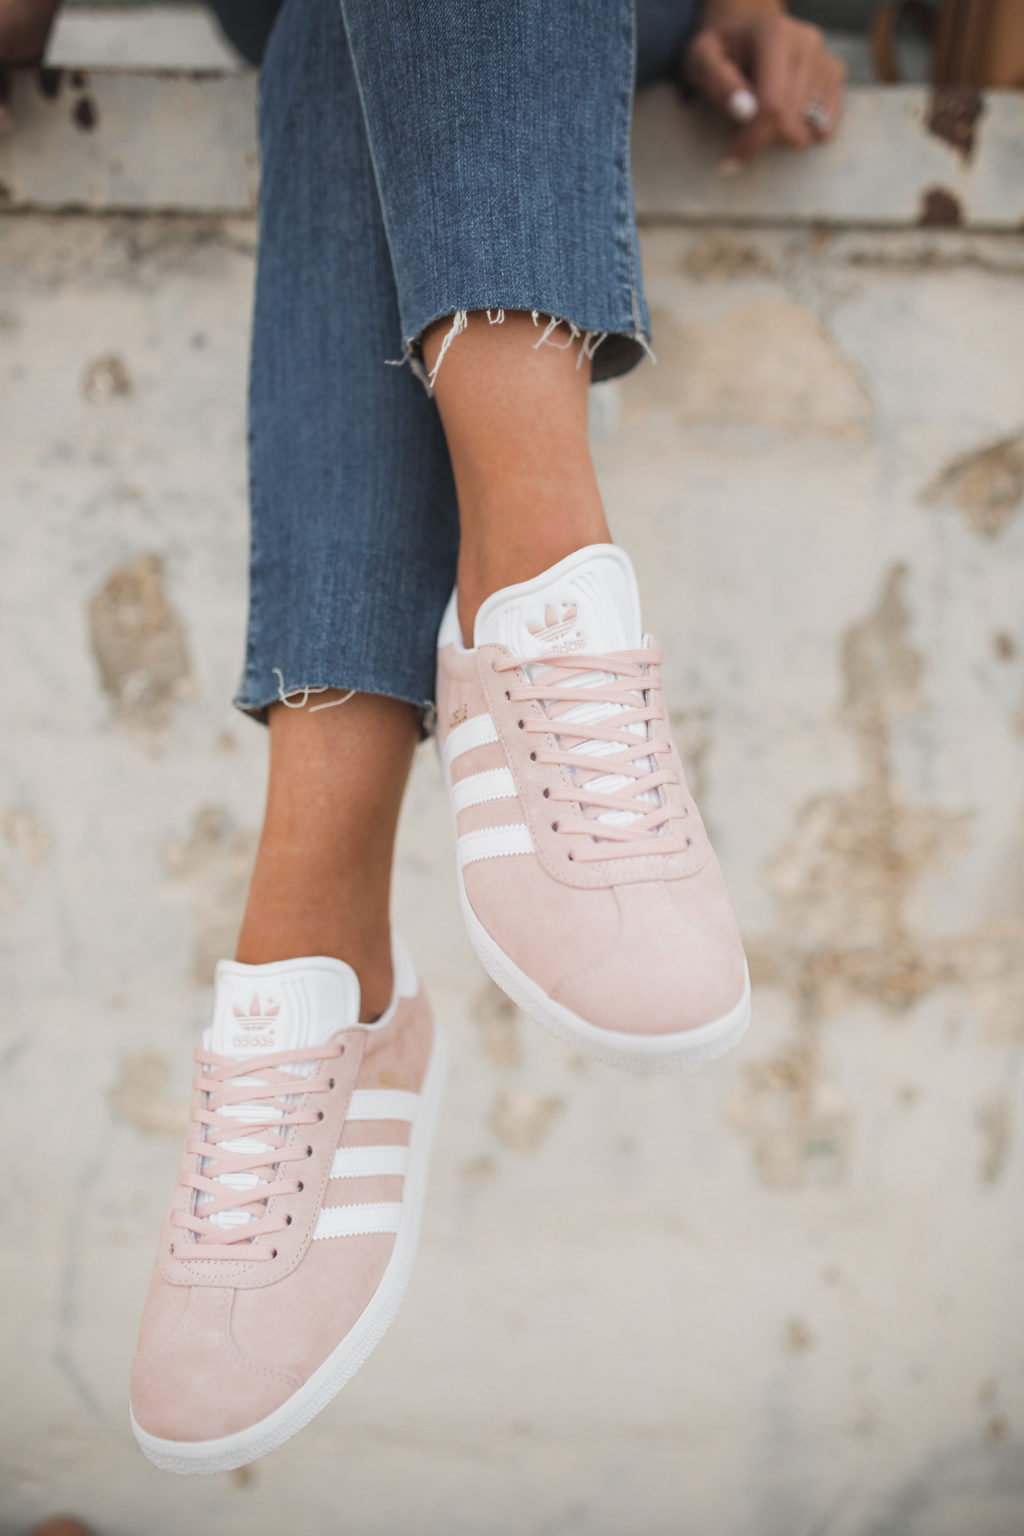 How I Style my Adidas Gazelle Sneakers | The Teacher Diva: a Dallas Fashion  Blog featuring Beauty & Lifestyle